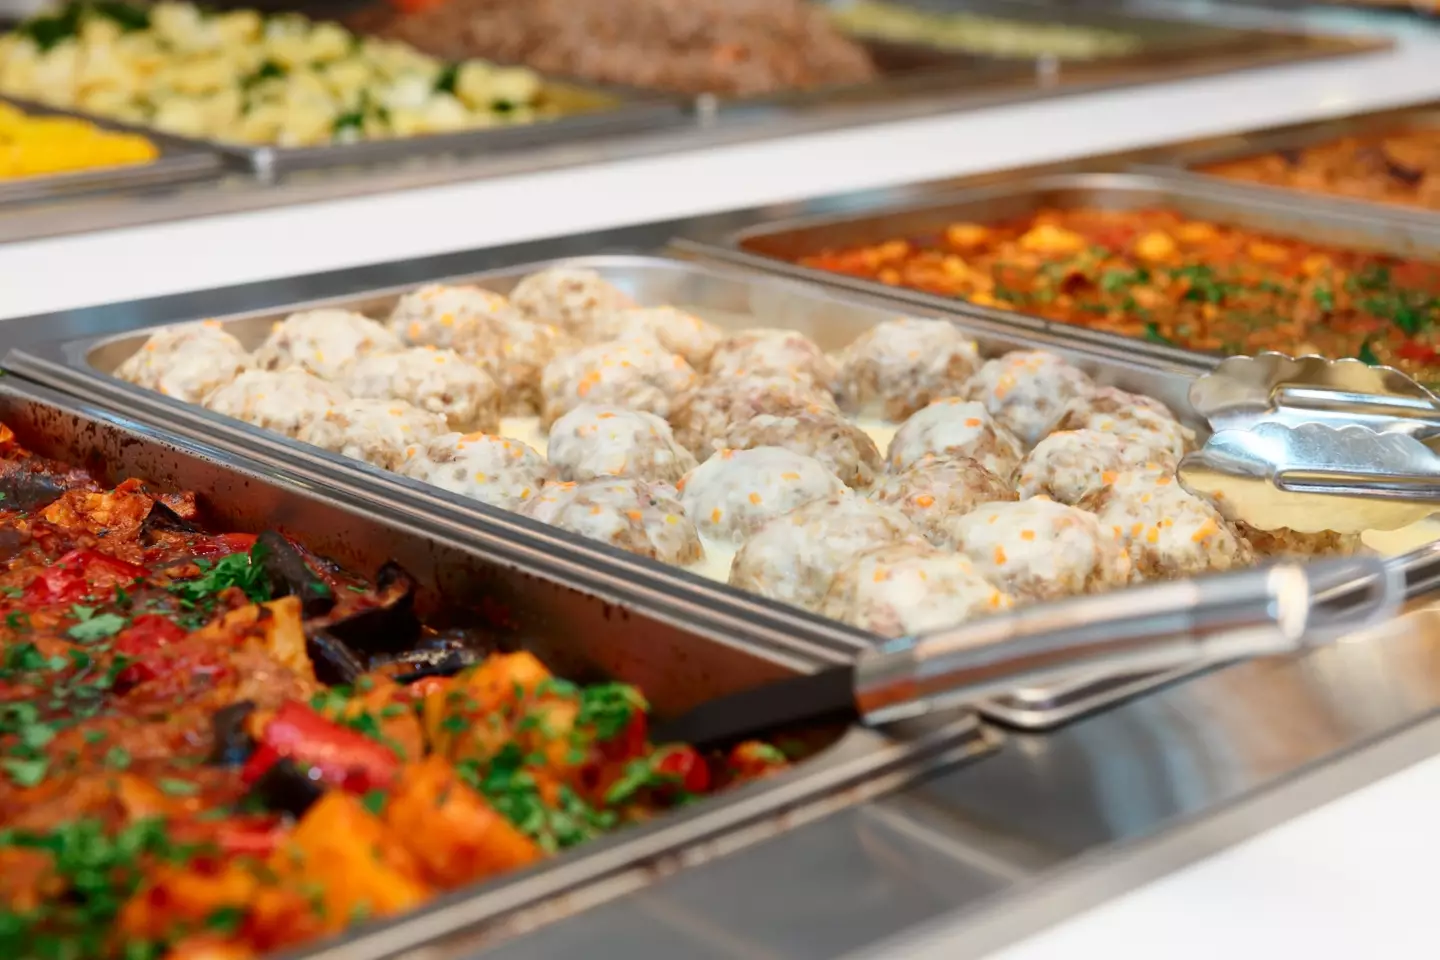 Bacteria can rapidly grow in hot food bars.